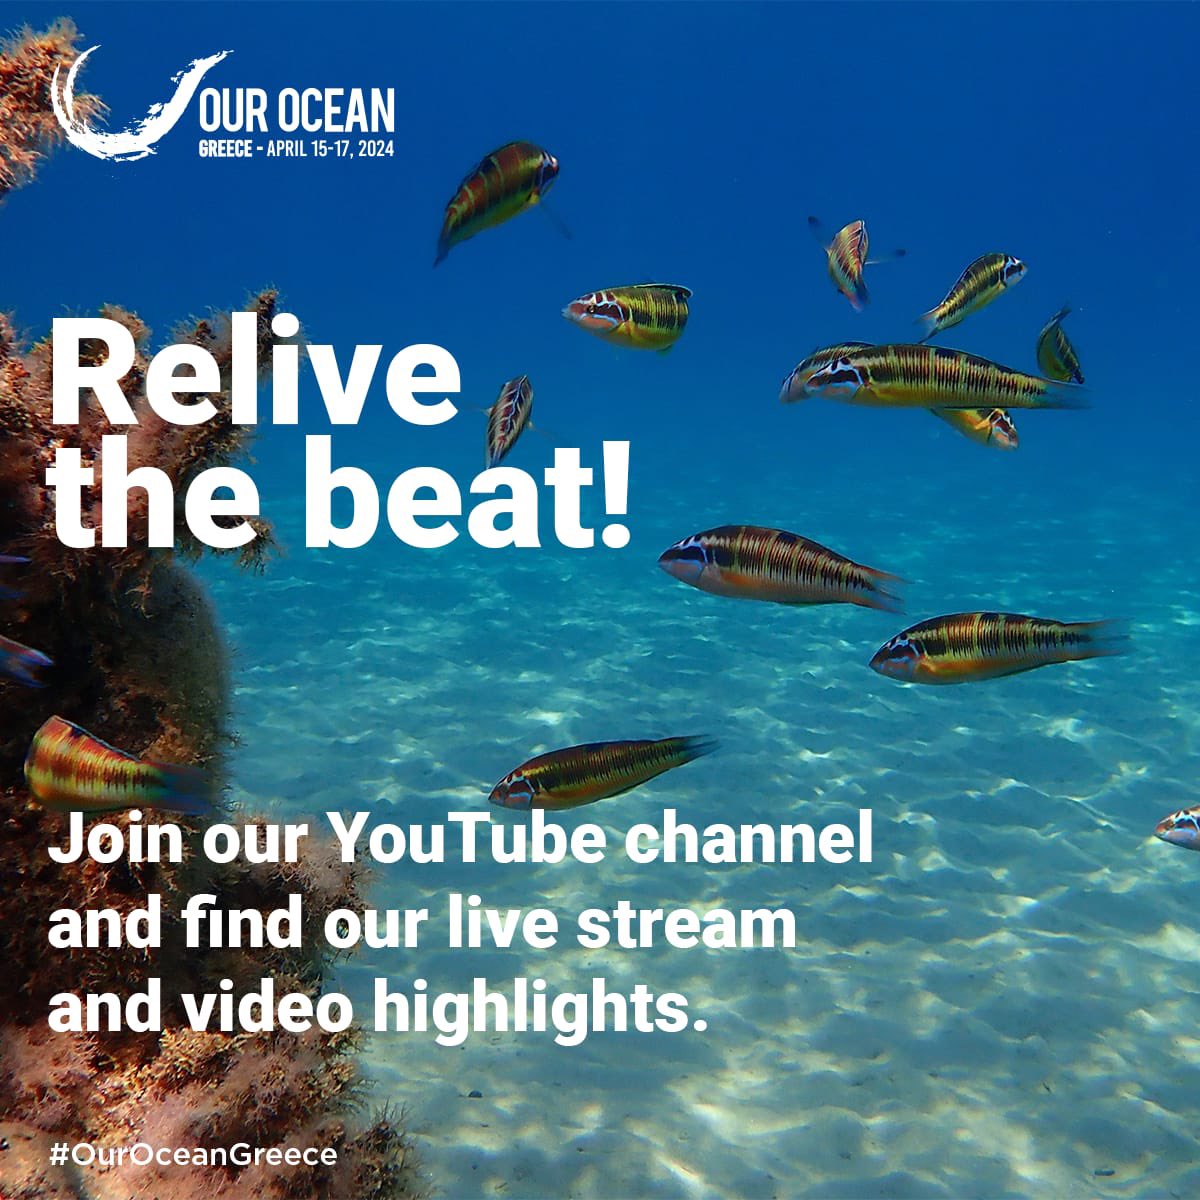 Don't miss out on the action! Rewatch the livestream and video highlights from the 9th Our Ocean Conference on the Our Ocean Youtube channel 🌊🎥

youtube.com/@OurOceanGreece 

 #OurOceanGreece #Athens🇬🇷 #Leadership #OurOcean2024